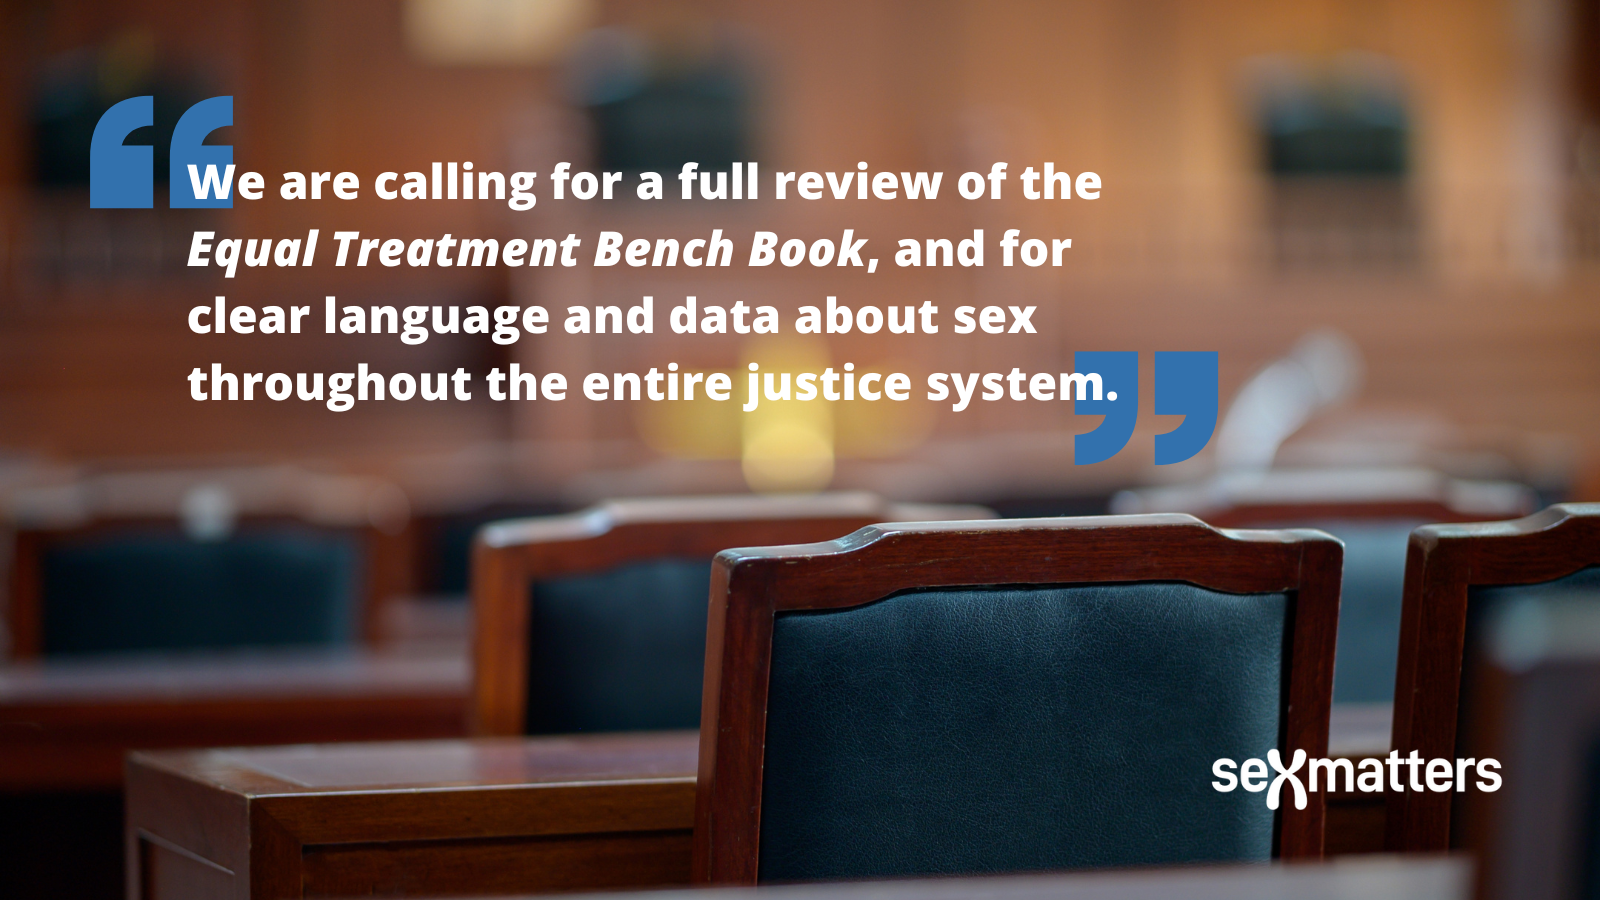 "We are calling for a full review of the Equal Treatment Bench Book, and for clear language and data about sex throughout the entire justice system."